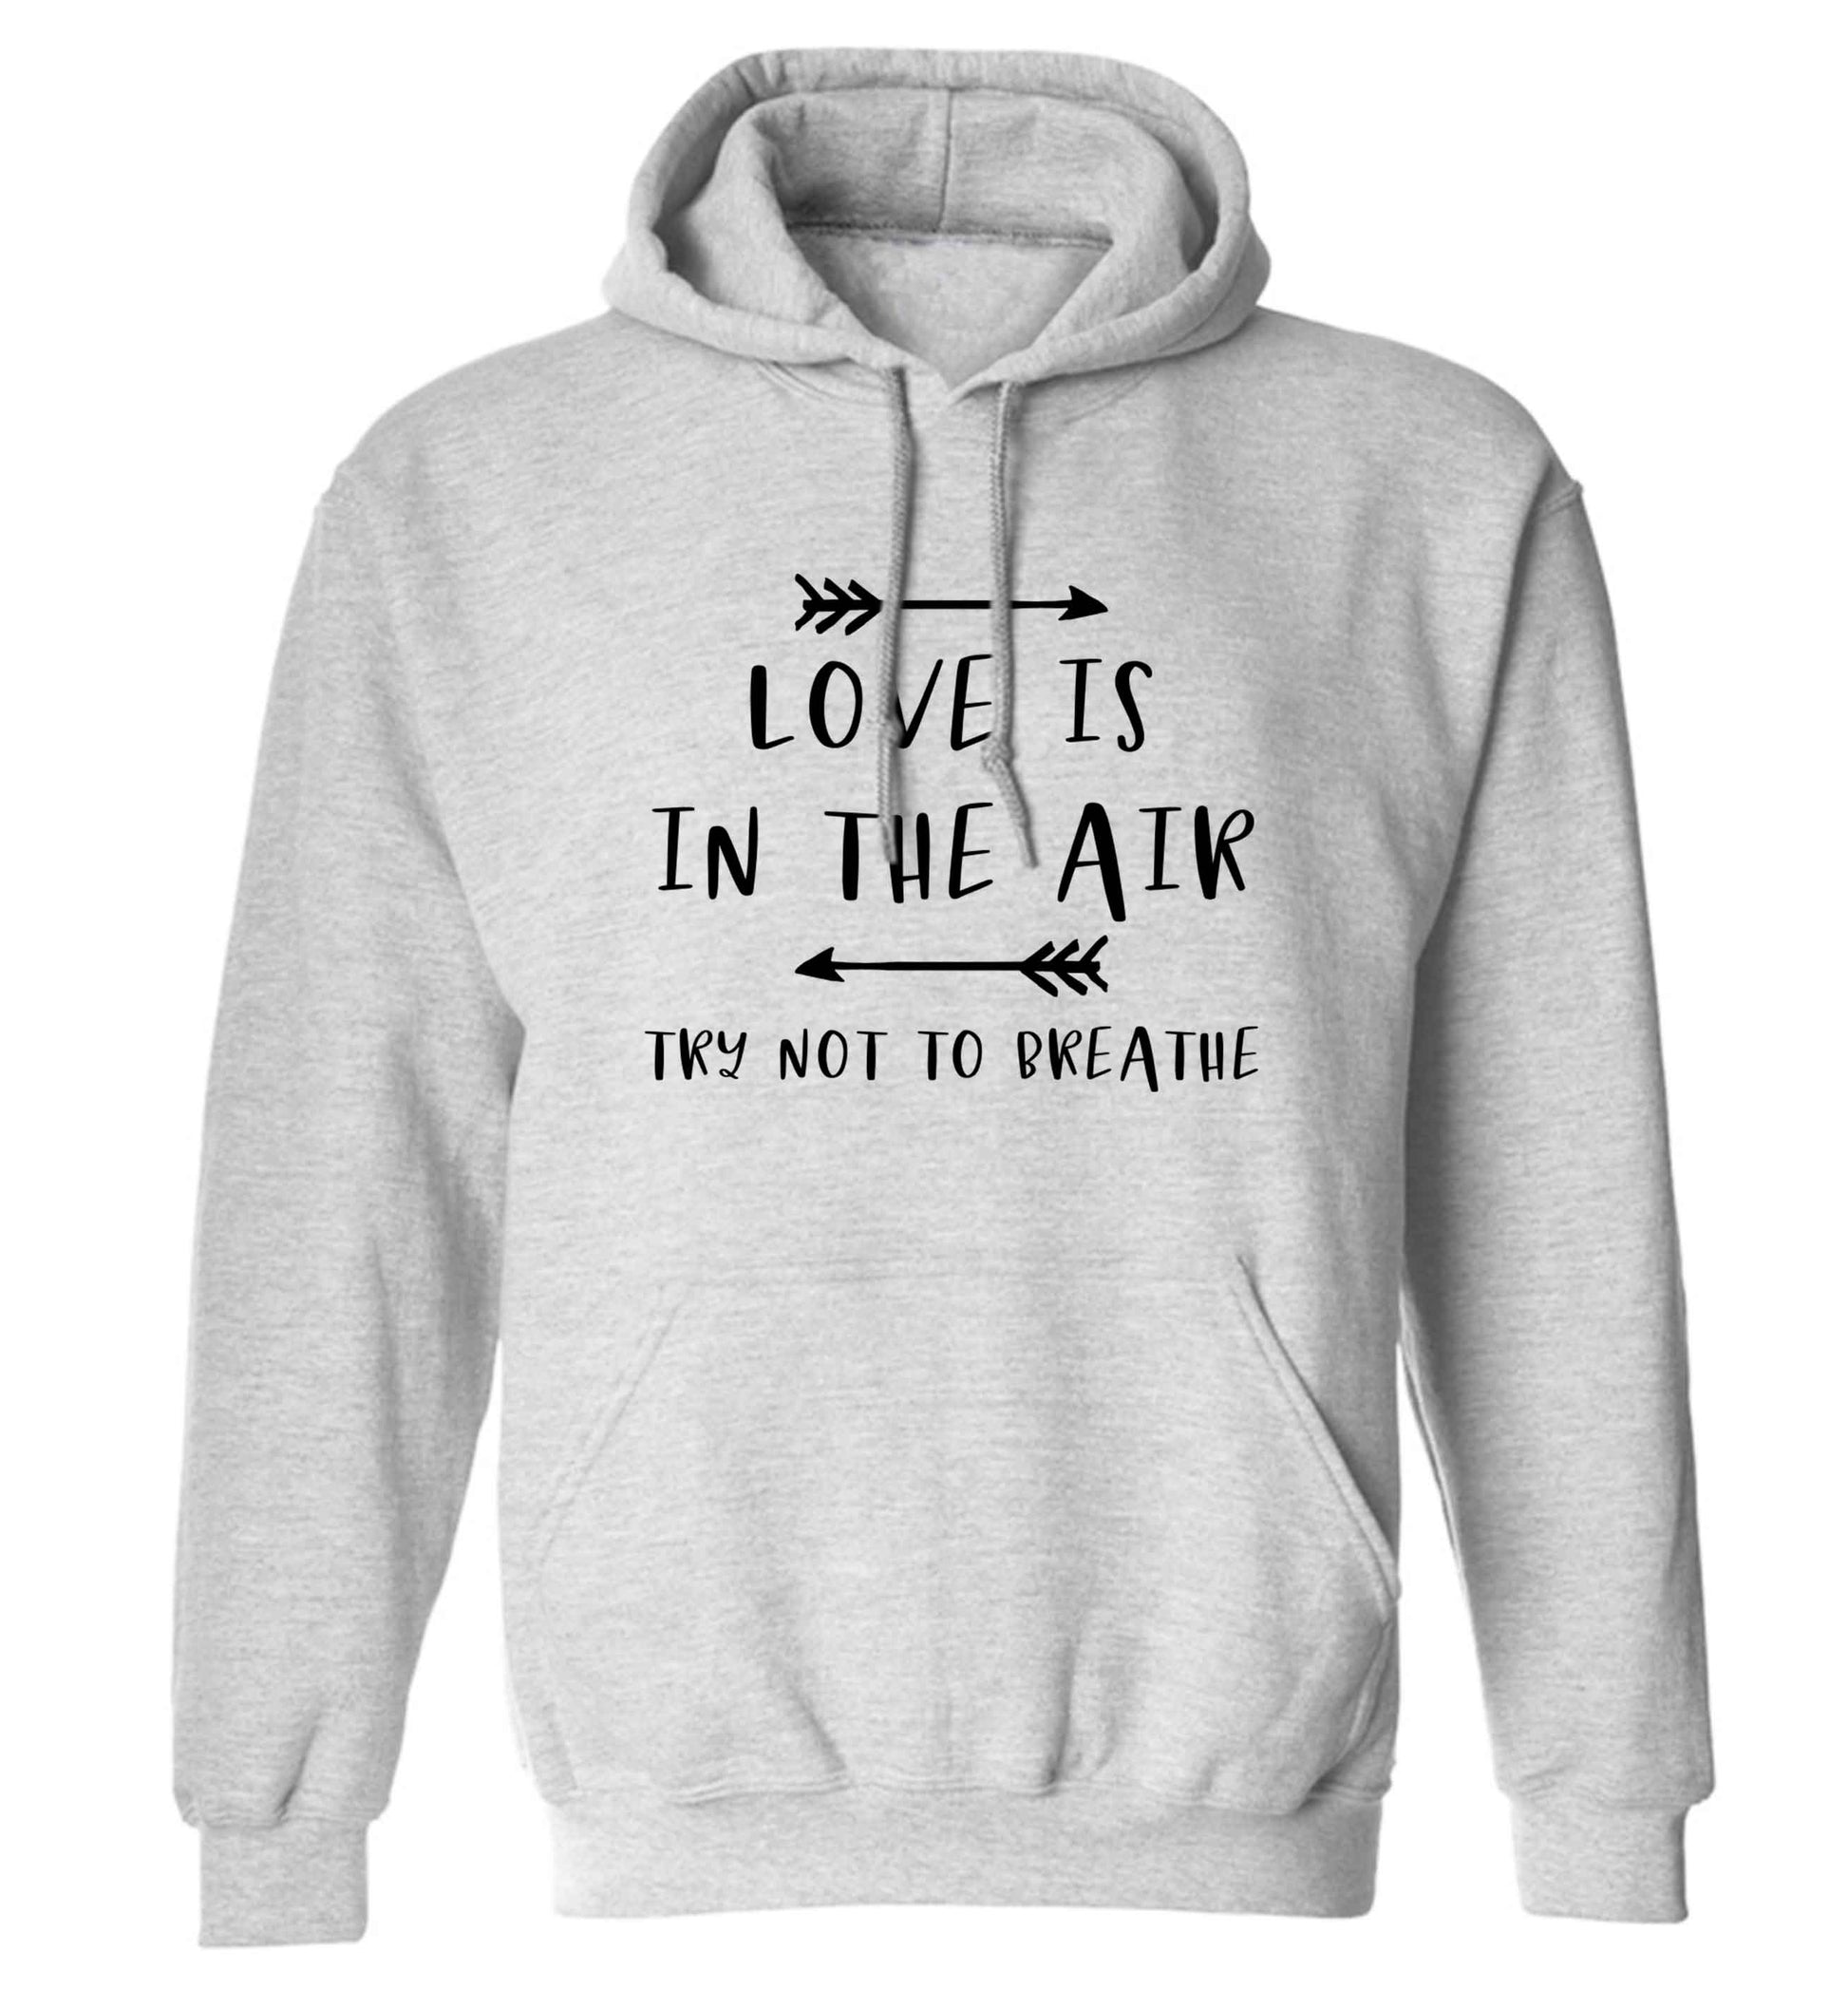 Love is in the air try not to breathe adults unisex grey hoodie 2XL